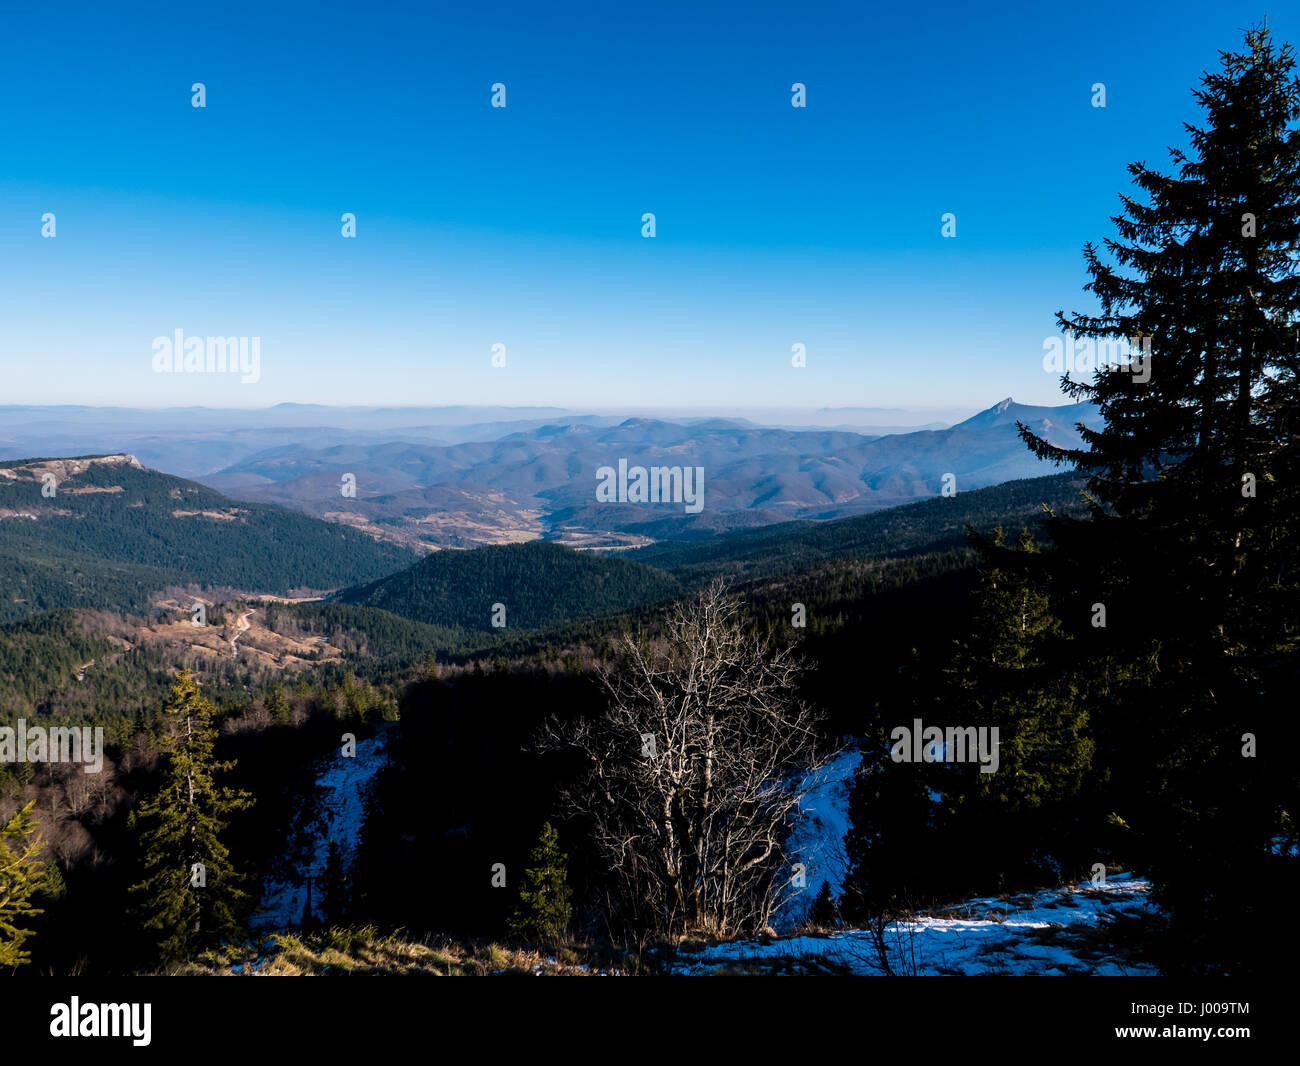 Mountain landscape in winter with blue sky above Stock Photo